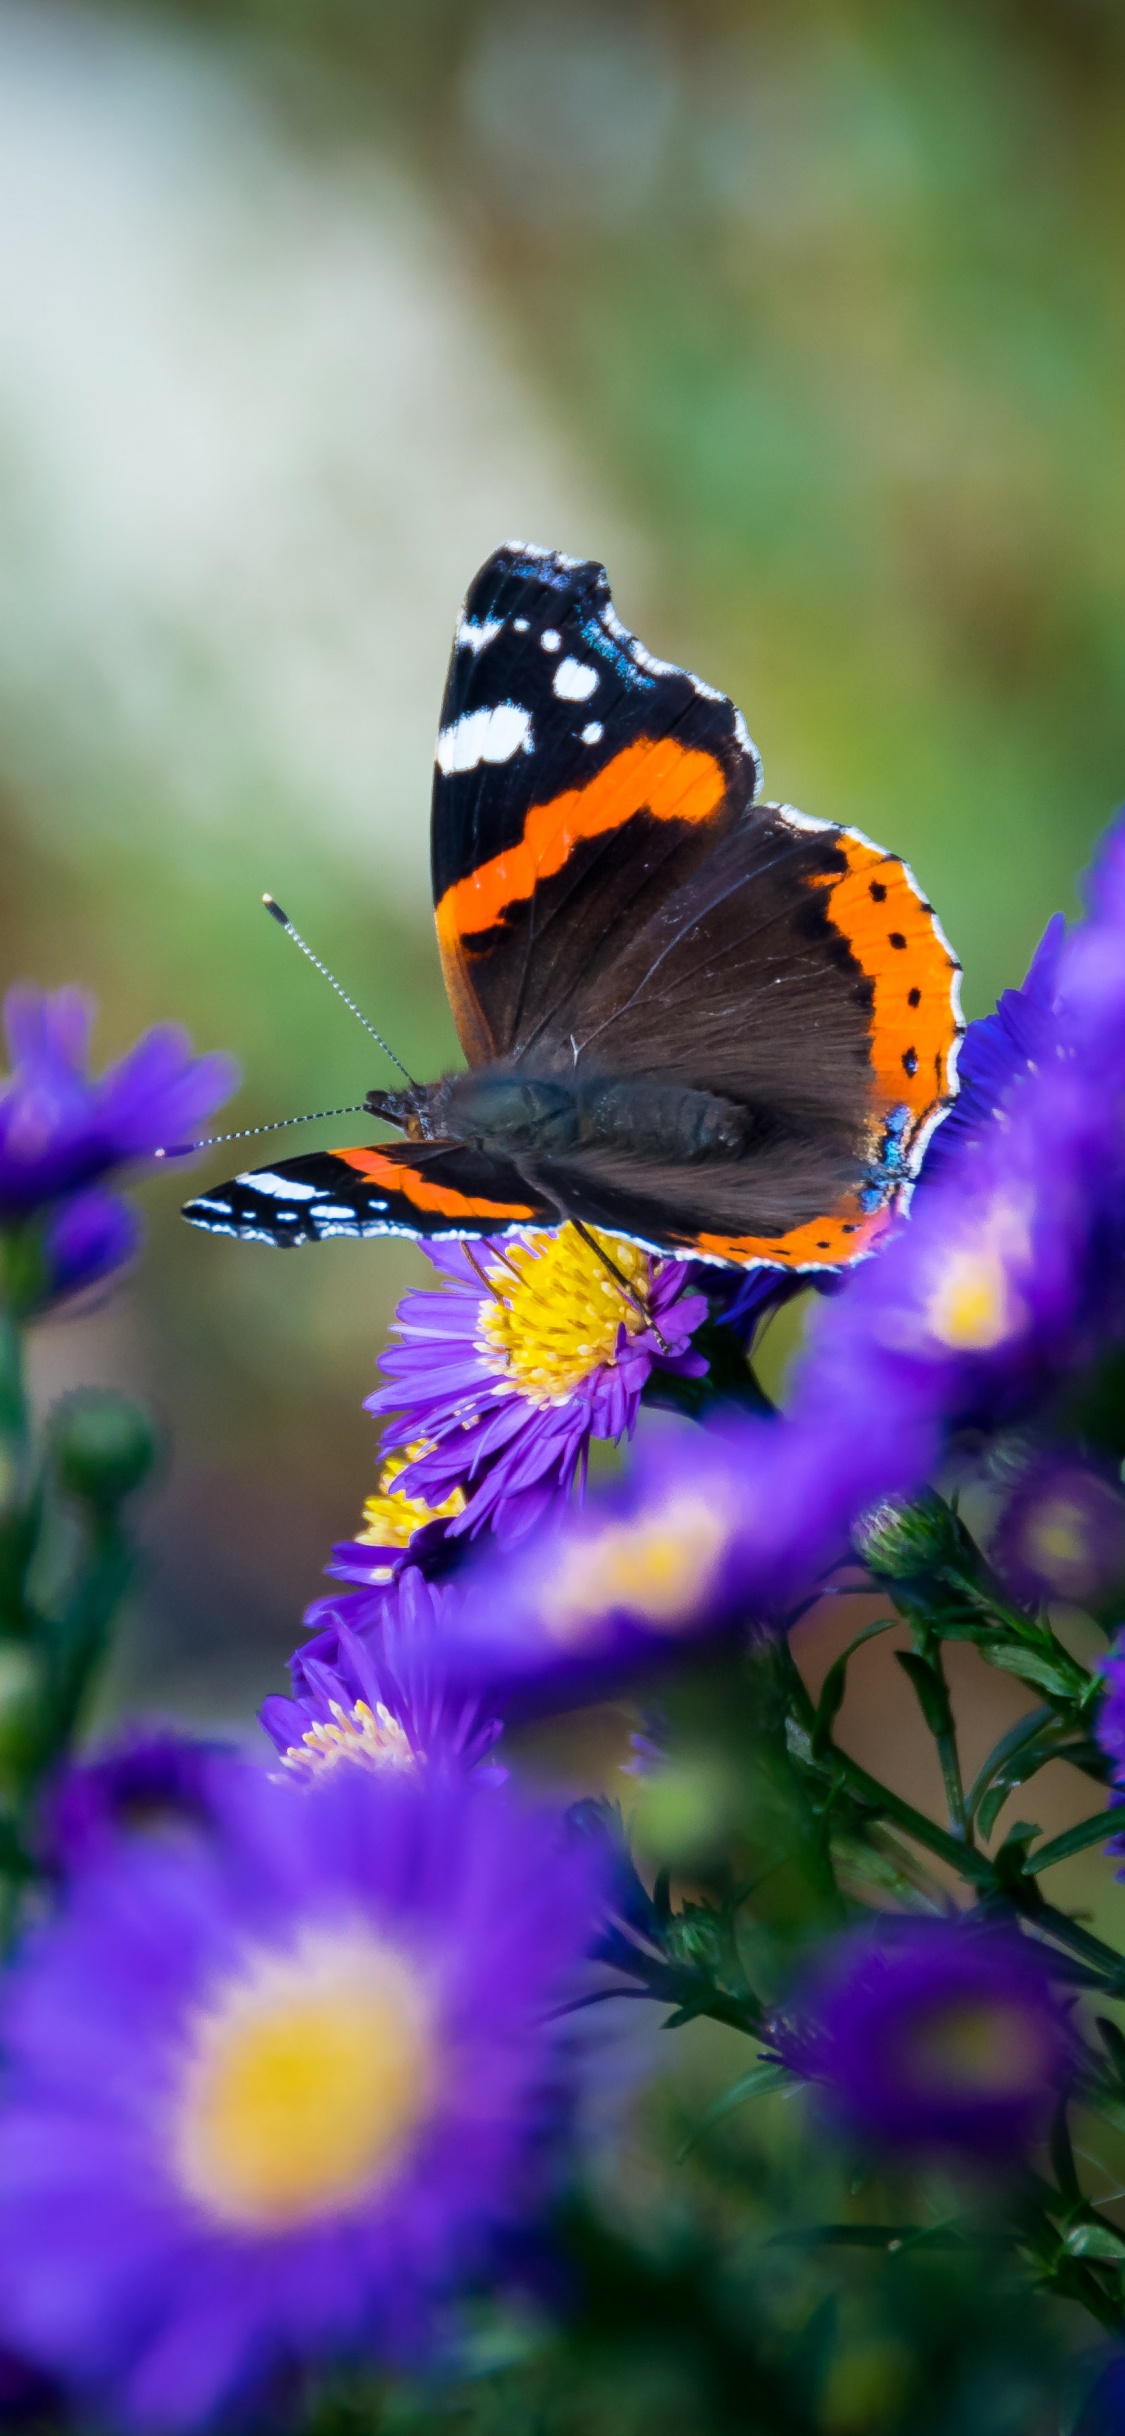 Insect, Flower, Butterfly, Cynthia Subgenus, Moths and Butterflies. Wallpaper in 1125x2436 Resolution